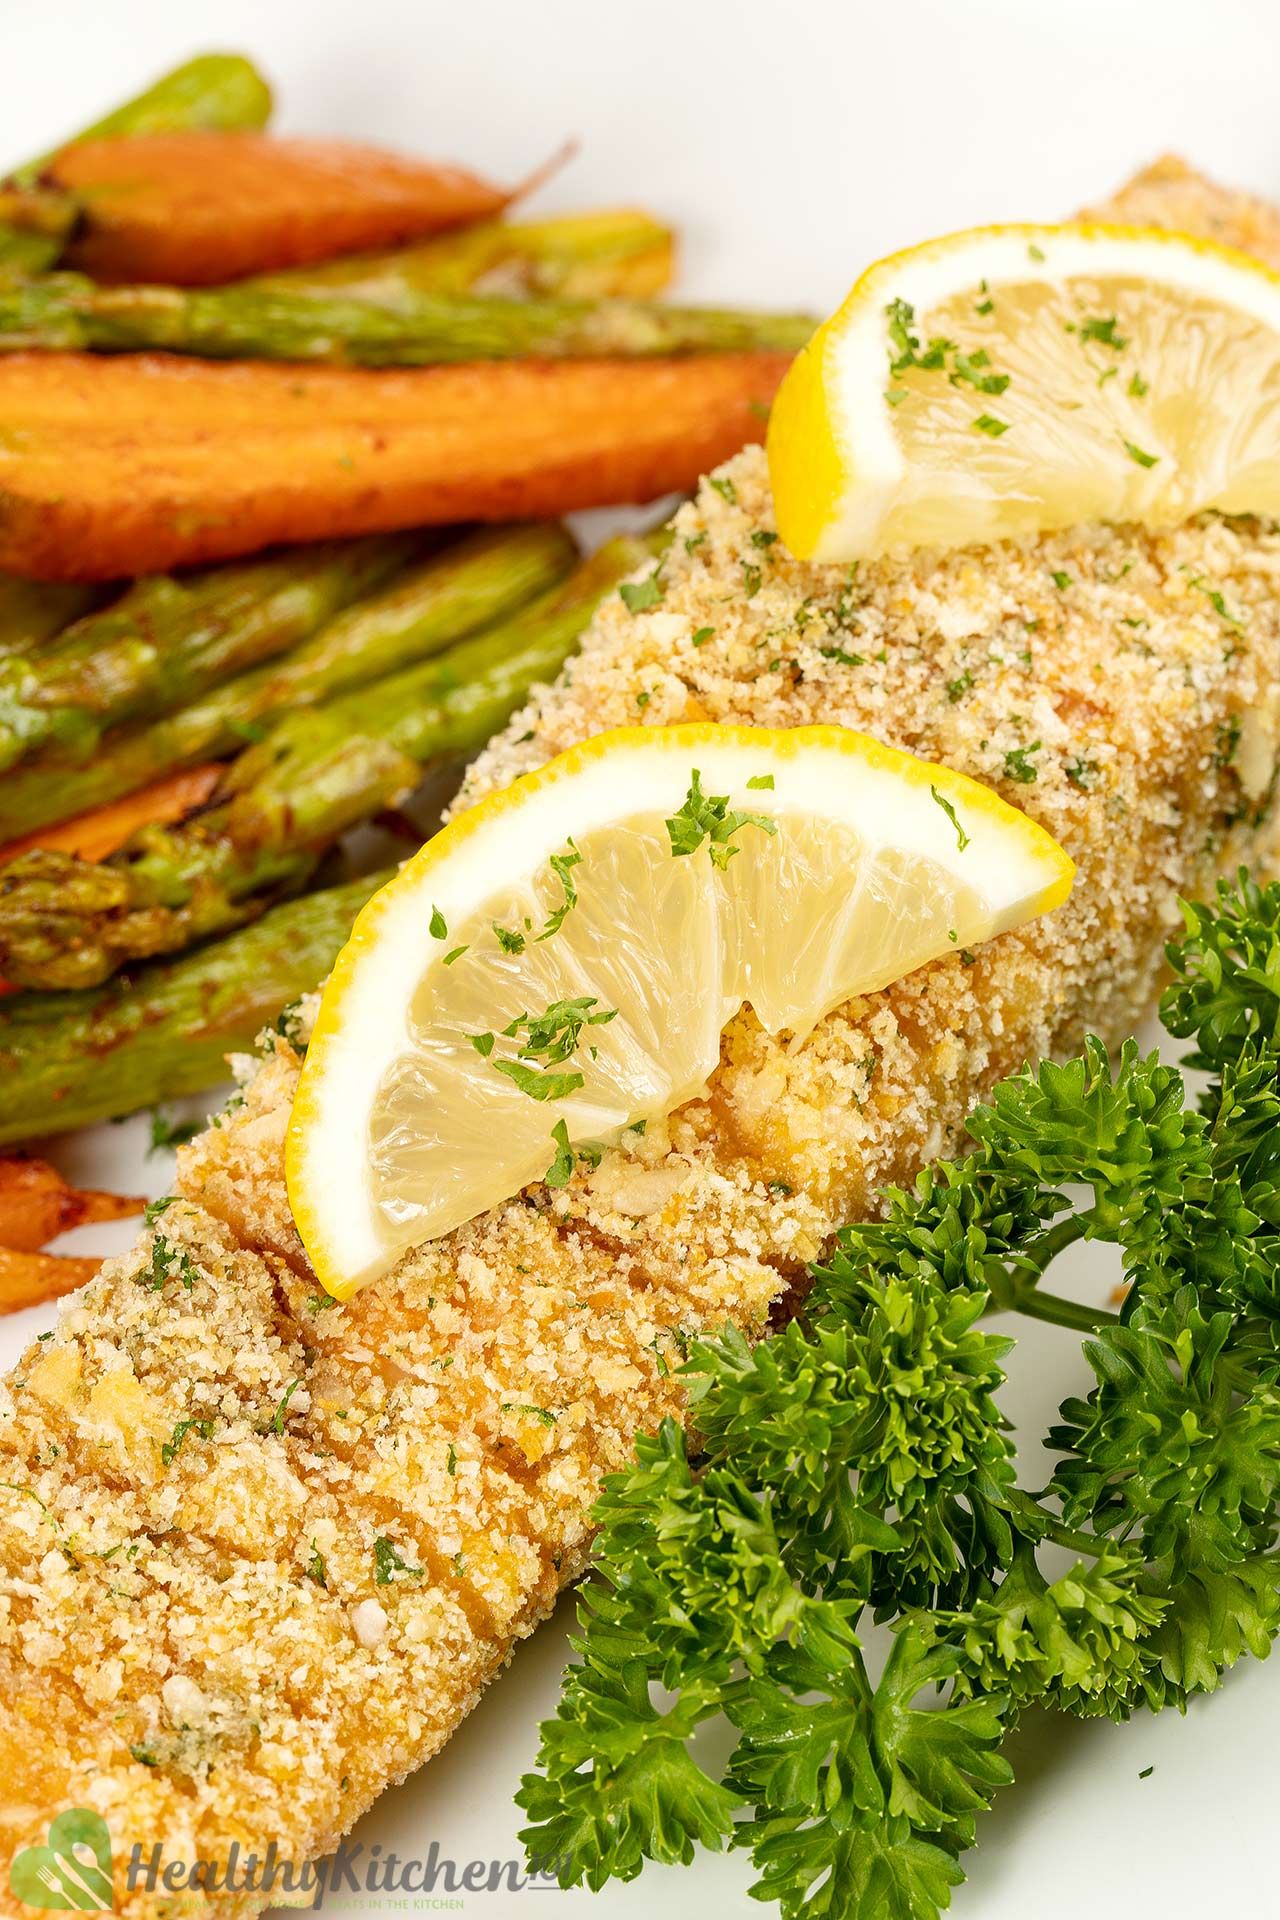 Parmesan Crusted Salmon Recipe with Asparagus: A Flavorful Dinner